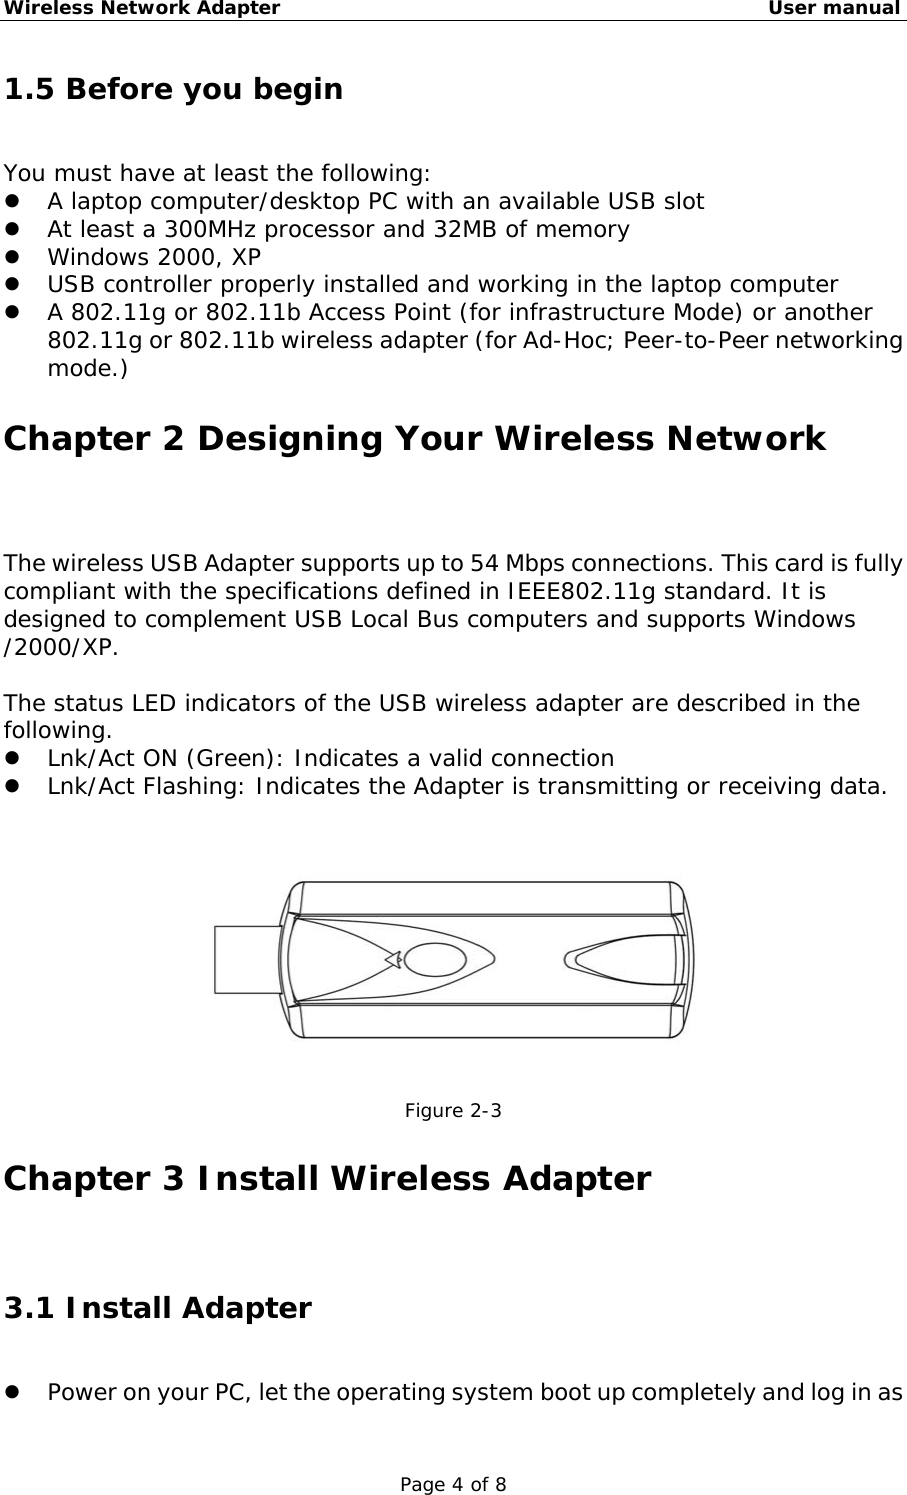 Wireless Network Adapter                                                    User manual Page 4 of 8 1.5 Before you begin You must have at least the following:   A laptop computer/desktop PC with an available USB slot   At least a 300MHz processor and 32MB of memory   Windows 2000, XP   USB controller properly installed and working in the laptop computer   A 802.11g or 802.11b Access Point (for infrastructure Mode) or another 802.11g or 802.11b wireless adapter (for Ad-Hoc; Peer-to-Peer networking mode.) Chapter 2 Designing Your Wireless Network The wireless USB Adapter supports up to 54 Mbps connections. This card is fully compliant with the specifications defined in IEEE802.11g standard. It is designed to complement USB Local Bus computers and supports Windows  /2000/XP.  The status LED indicators of the USB wireless adapter are described in the following.   Lnk/Act ON (Green): Indicates a valid connection    Lnk/Act Flashing: Indicates the Adapter is transmitting or receiving data.   Figure 2-3 Chapter 3 Install Wireless Adapter 3.1 Install Adapter   Power on your PC, let the operating system boot up completely and log in as 